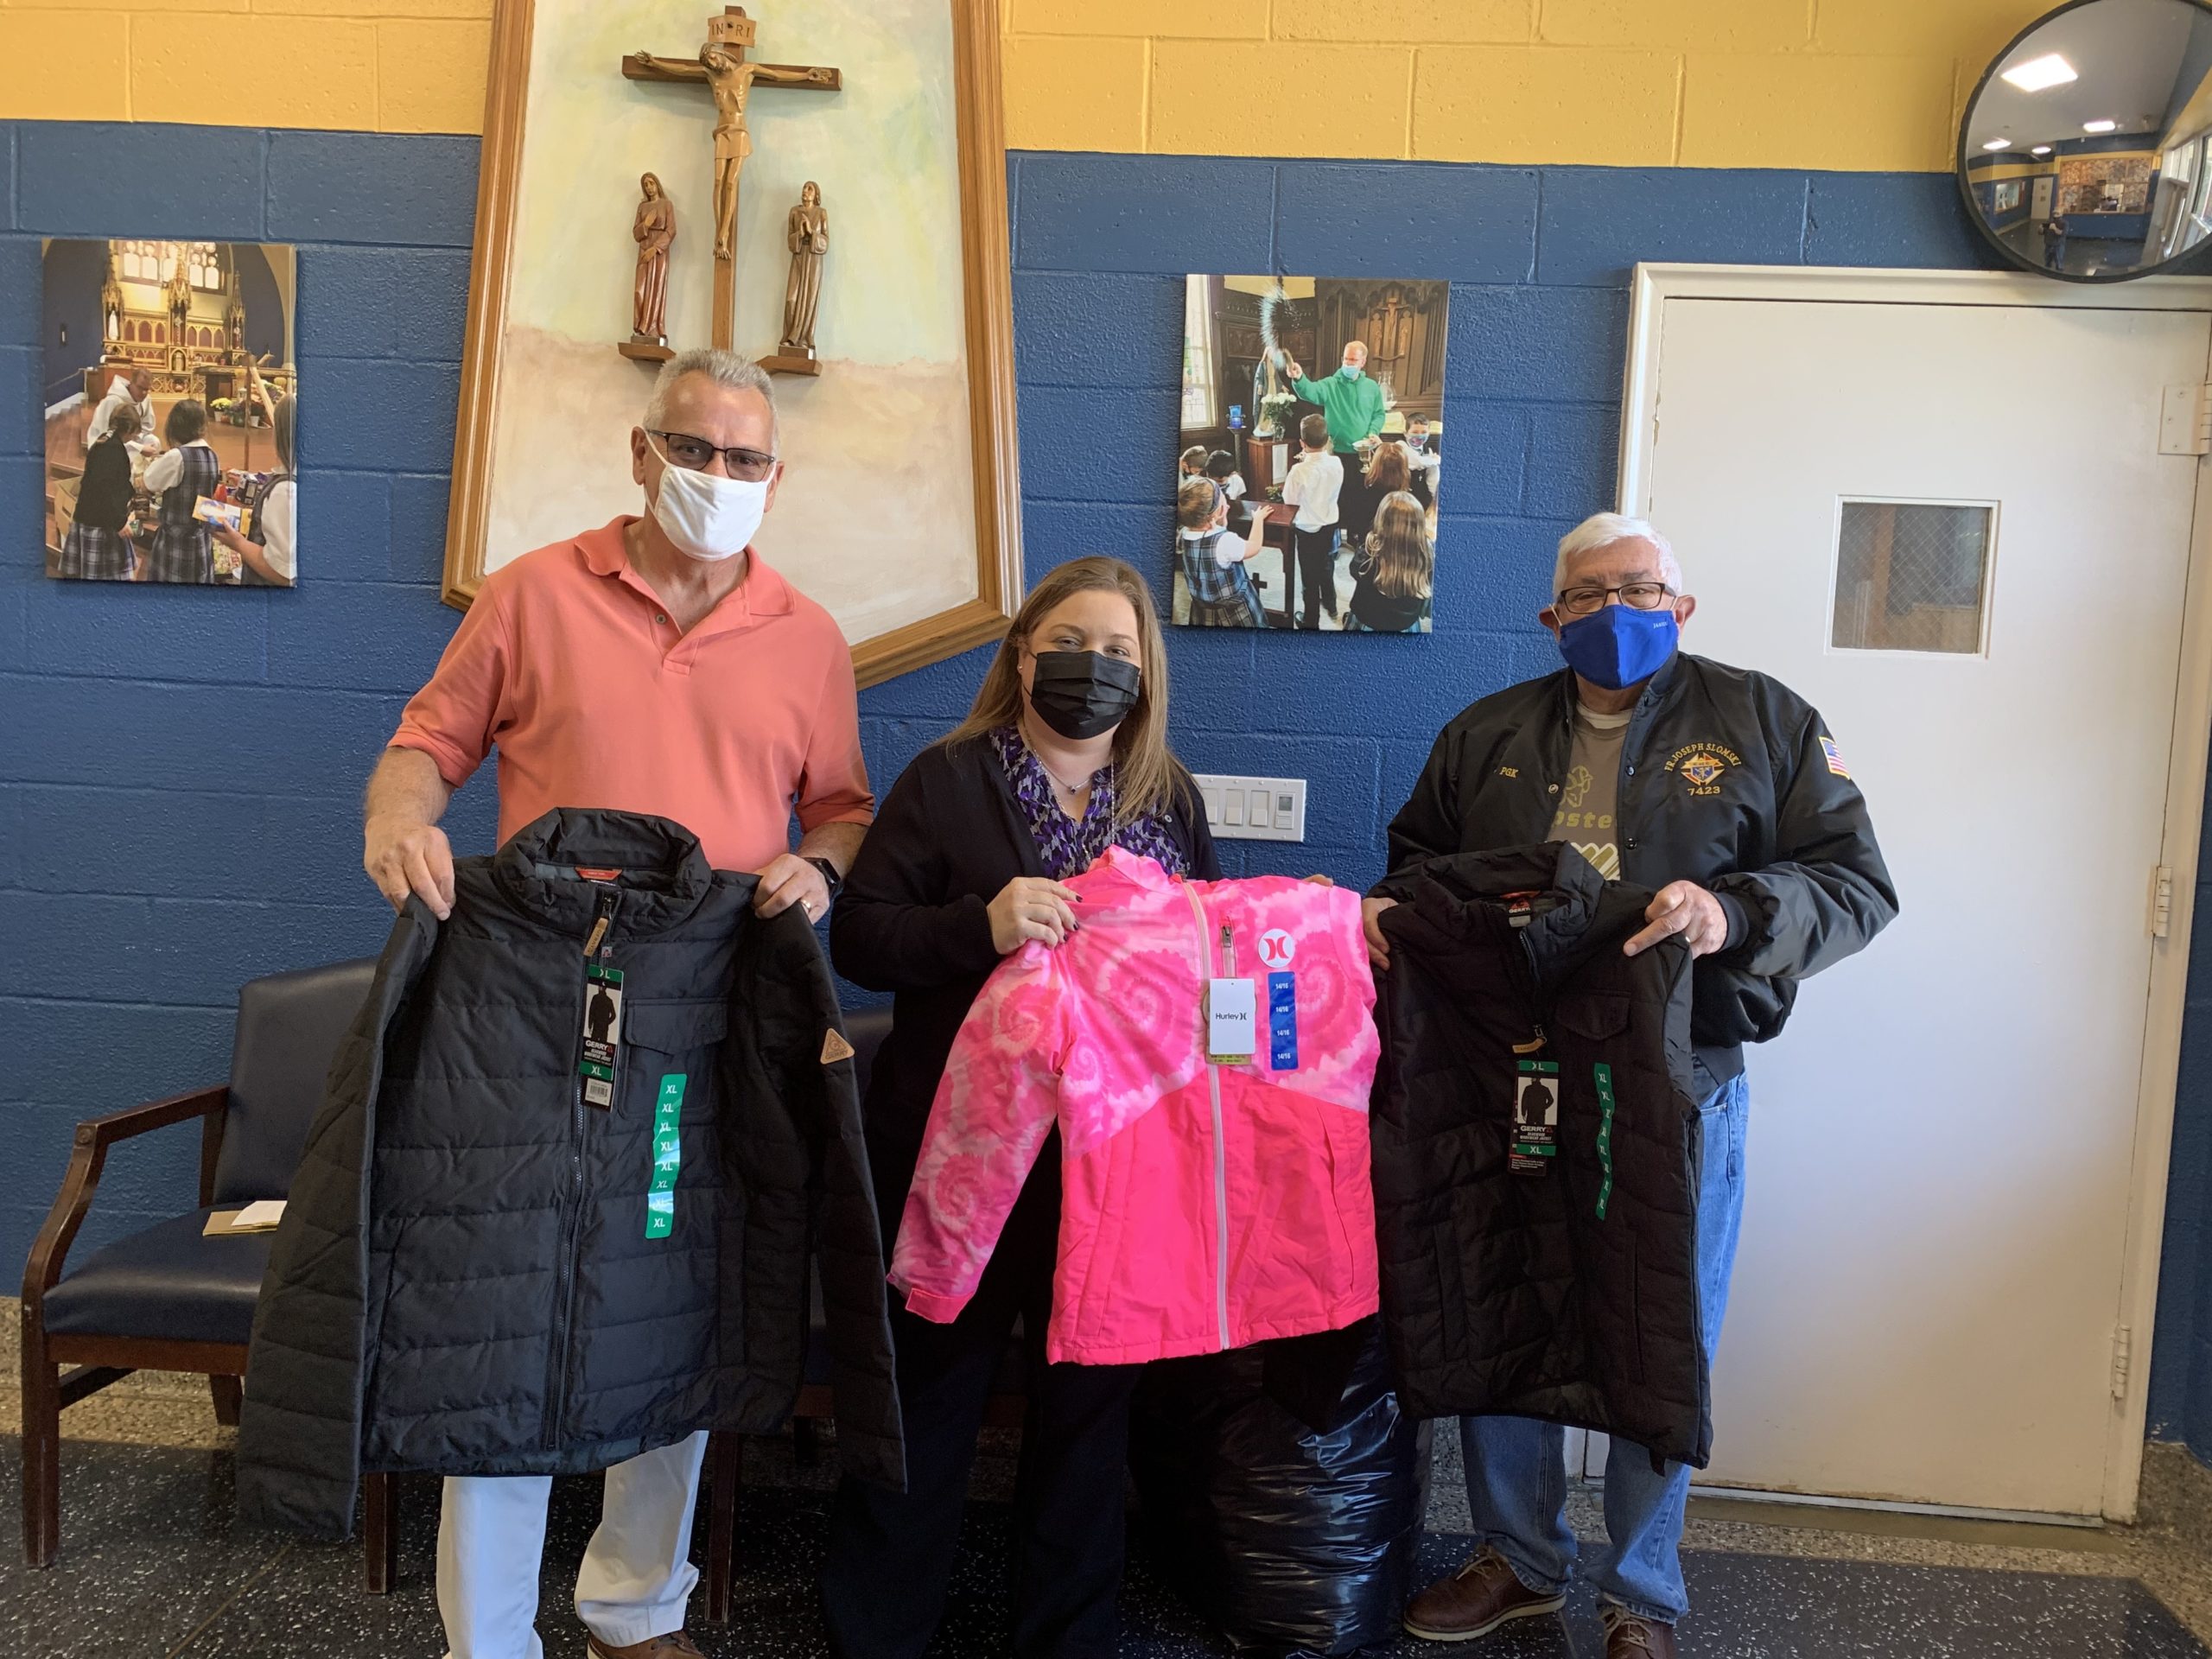 The Father Slomski Council of the Knight of Columbus held its annual Coats for Kids program this year, handing out 168 coats at seven schools on the East End recently. From left, Knight Mike Doyle, Westhampton Beach Middle School Principal Dawn Waller, and Knight Phil Debrita.